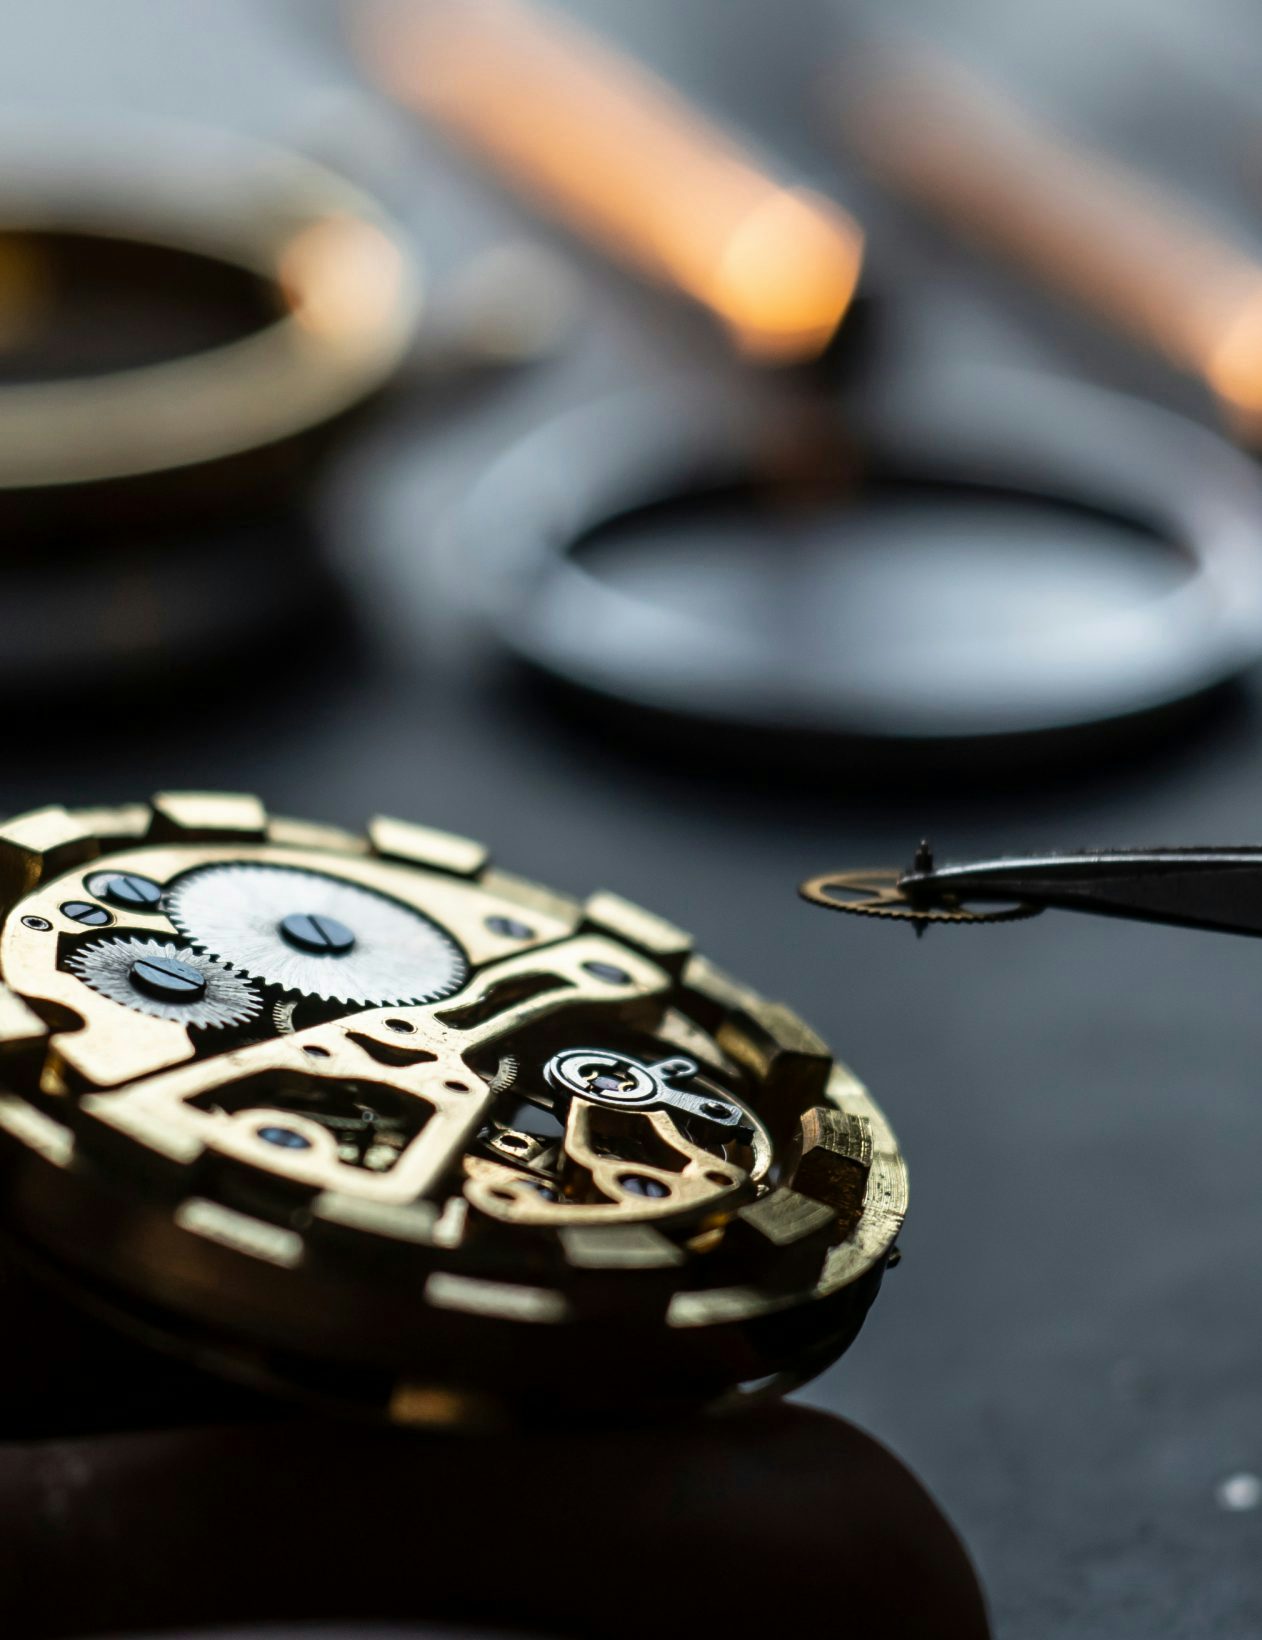 The Swiss watch industry driven by e-commerce and the second-hand market